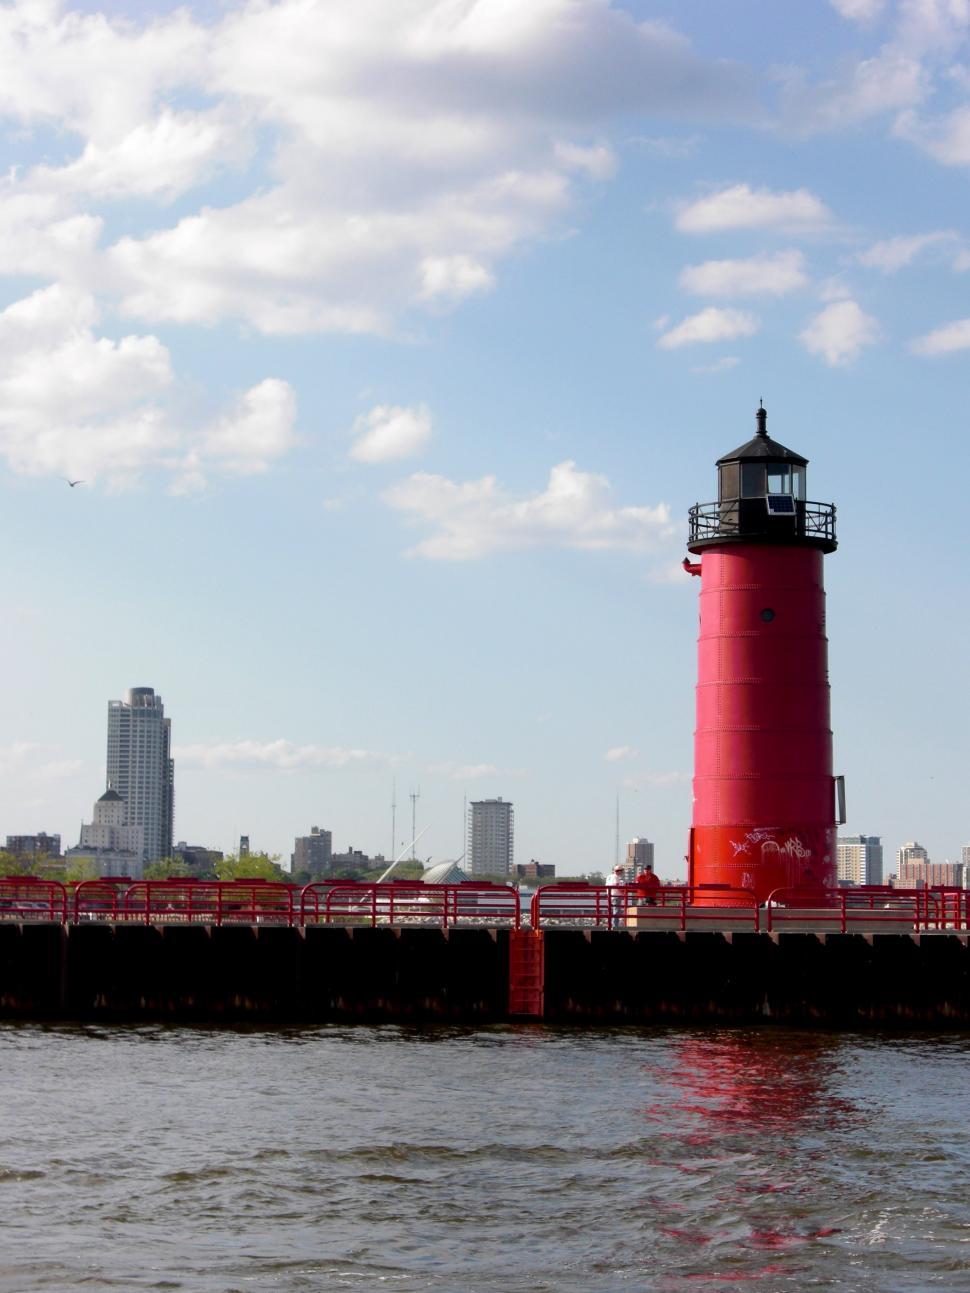 Free Image of Red Light House on Pier 